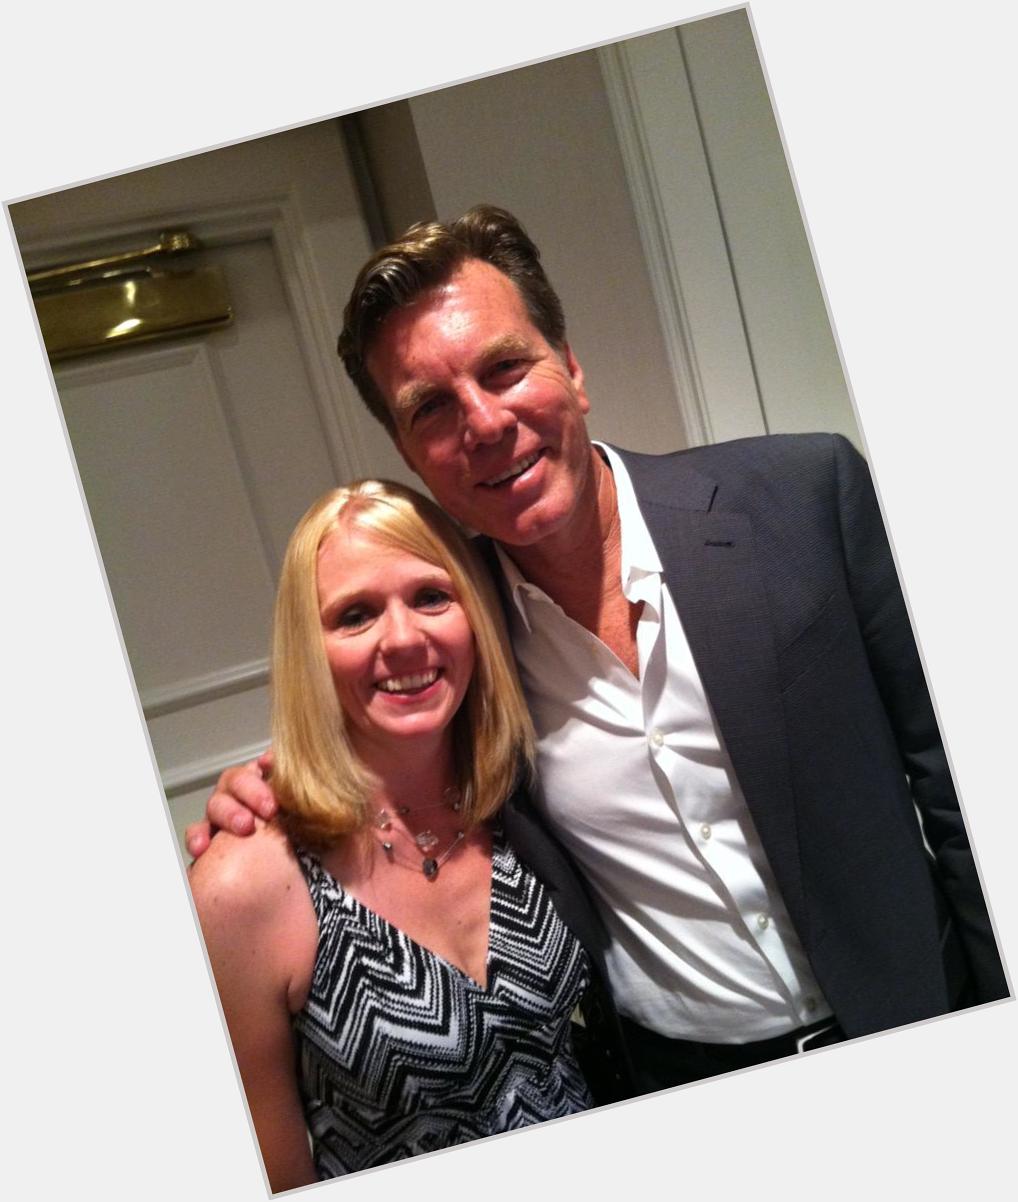 Happy Birthday 2the awesome guy! happy I got to meet him can\t wait to meet him again! Peter Bergman is the best! 